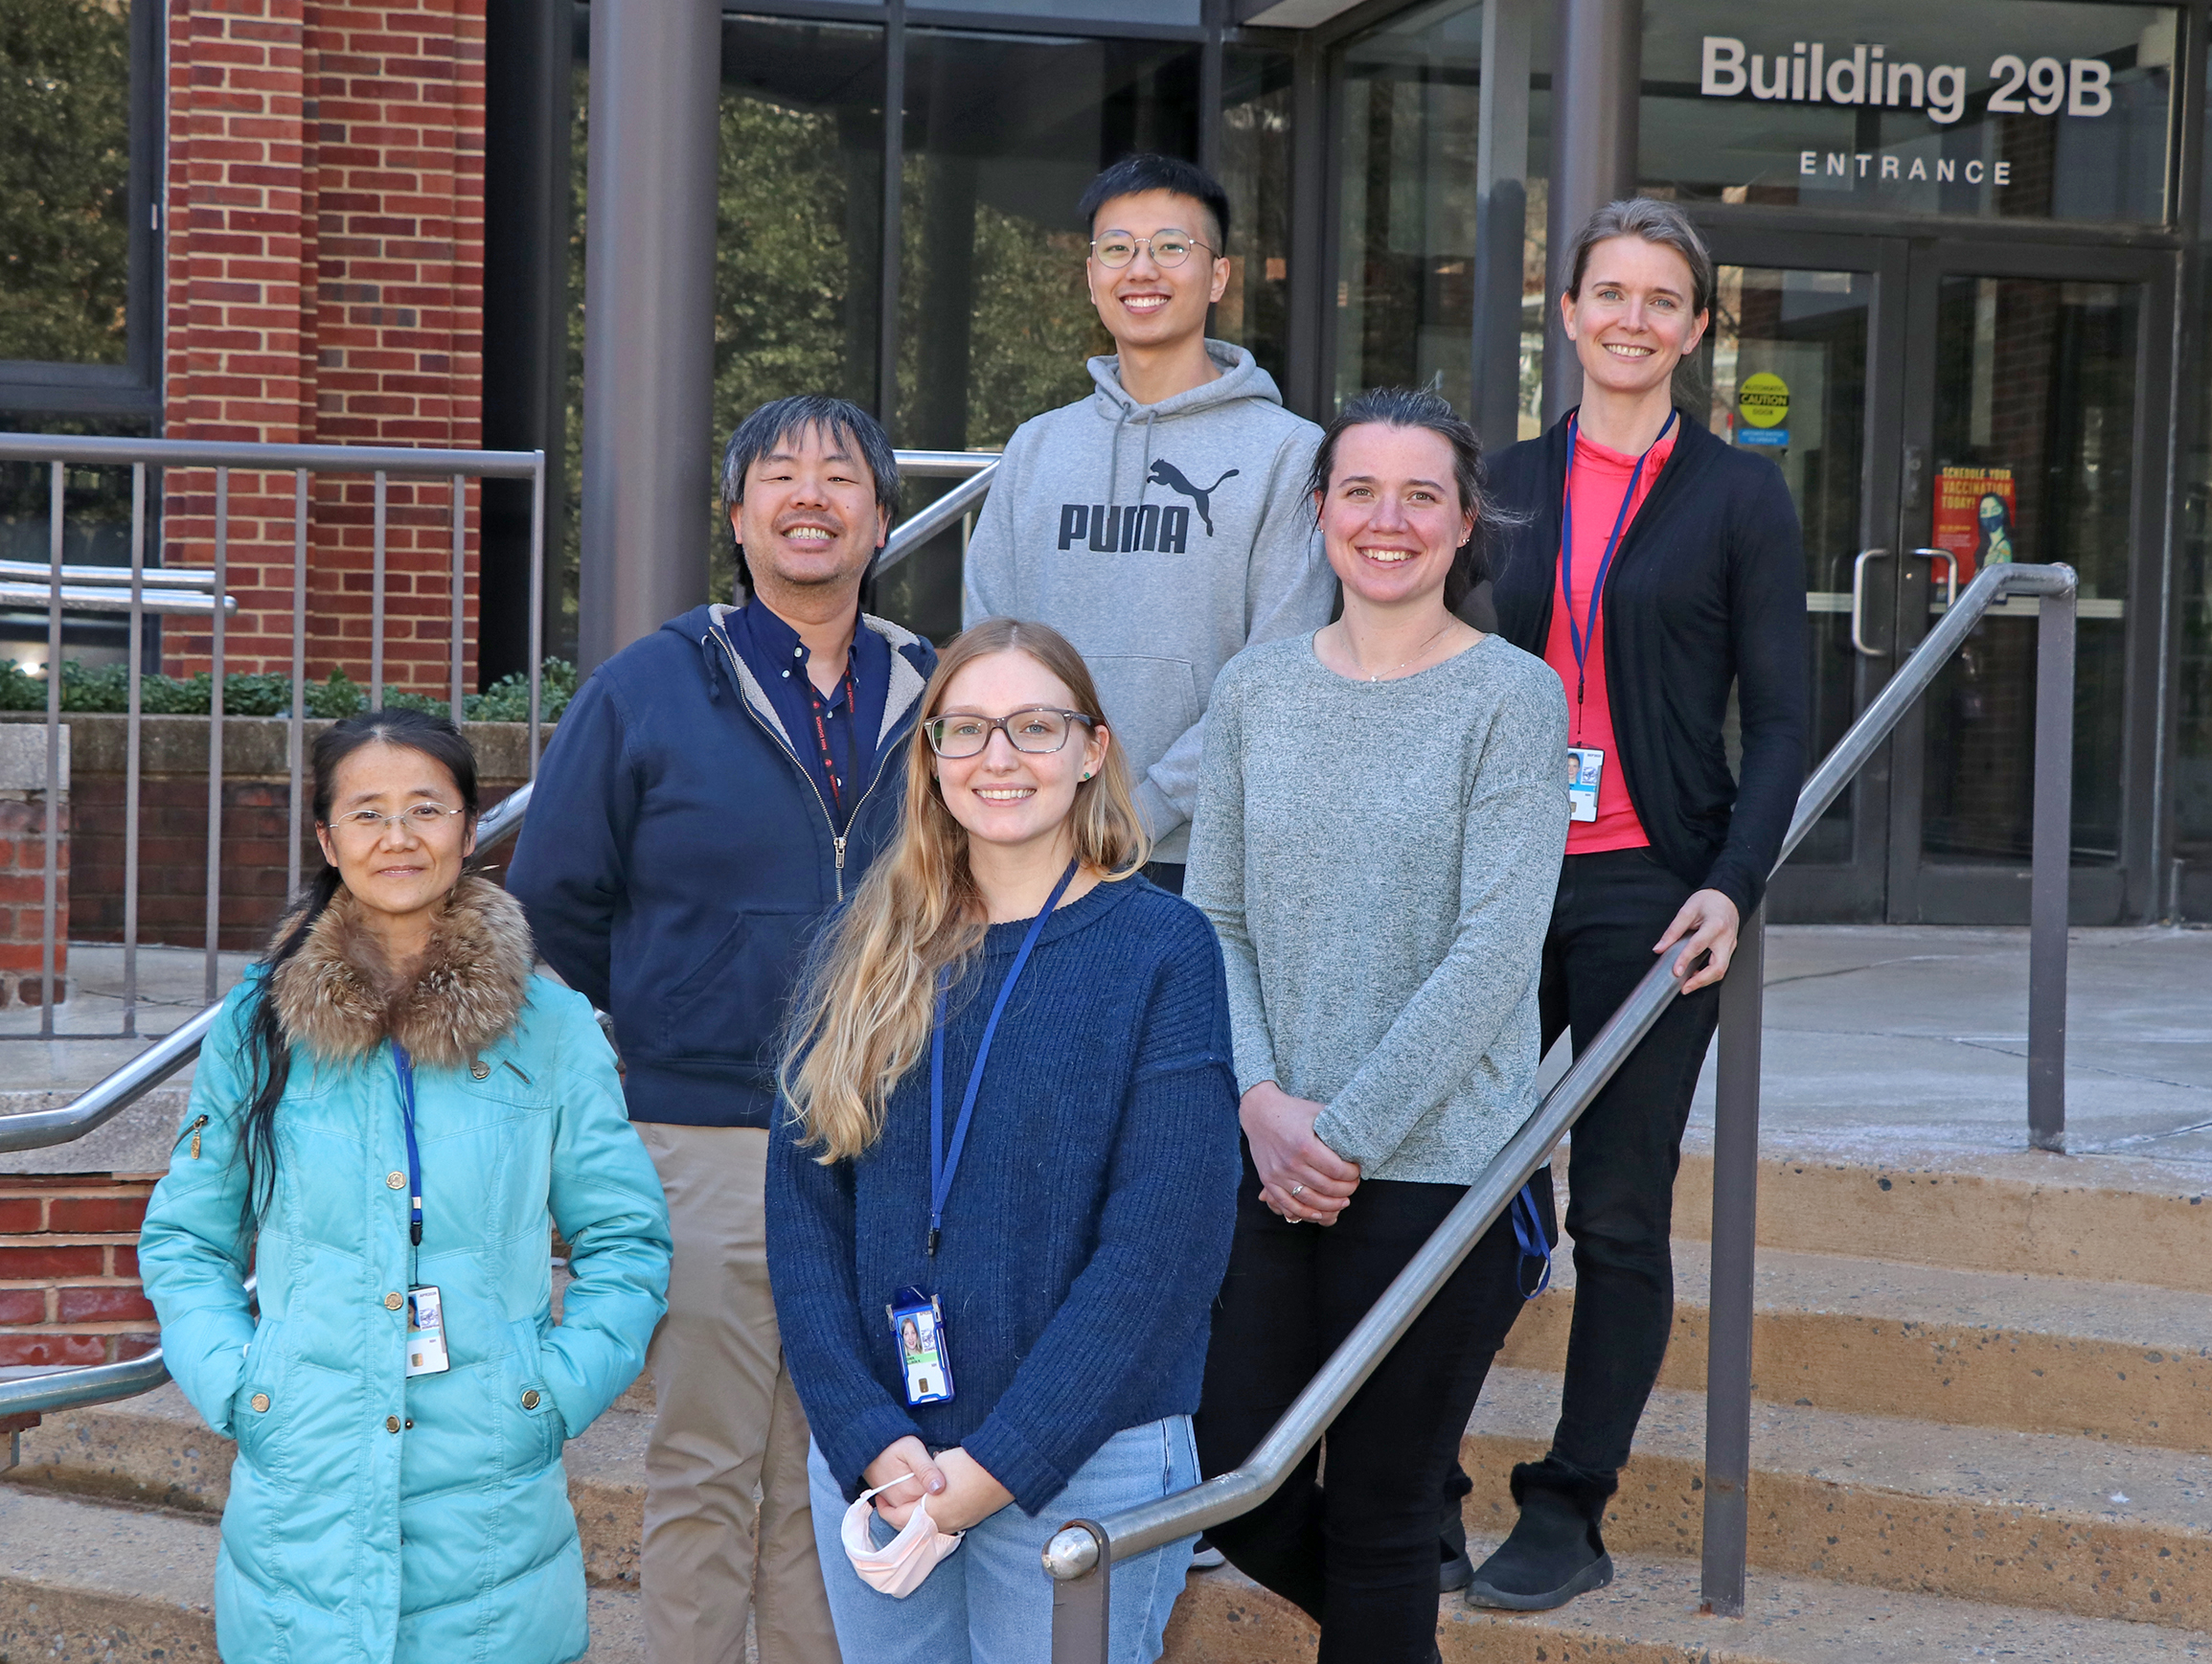 Matthies lab group photo.  In the first row from left to right is Fei Zhou and Allison Zeher.  Second row from left to right is Rick Huang and Elissa Moller.  In the third row from left to right is Louis Tung Faat Lai and Doreen Matthies.